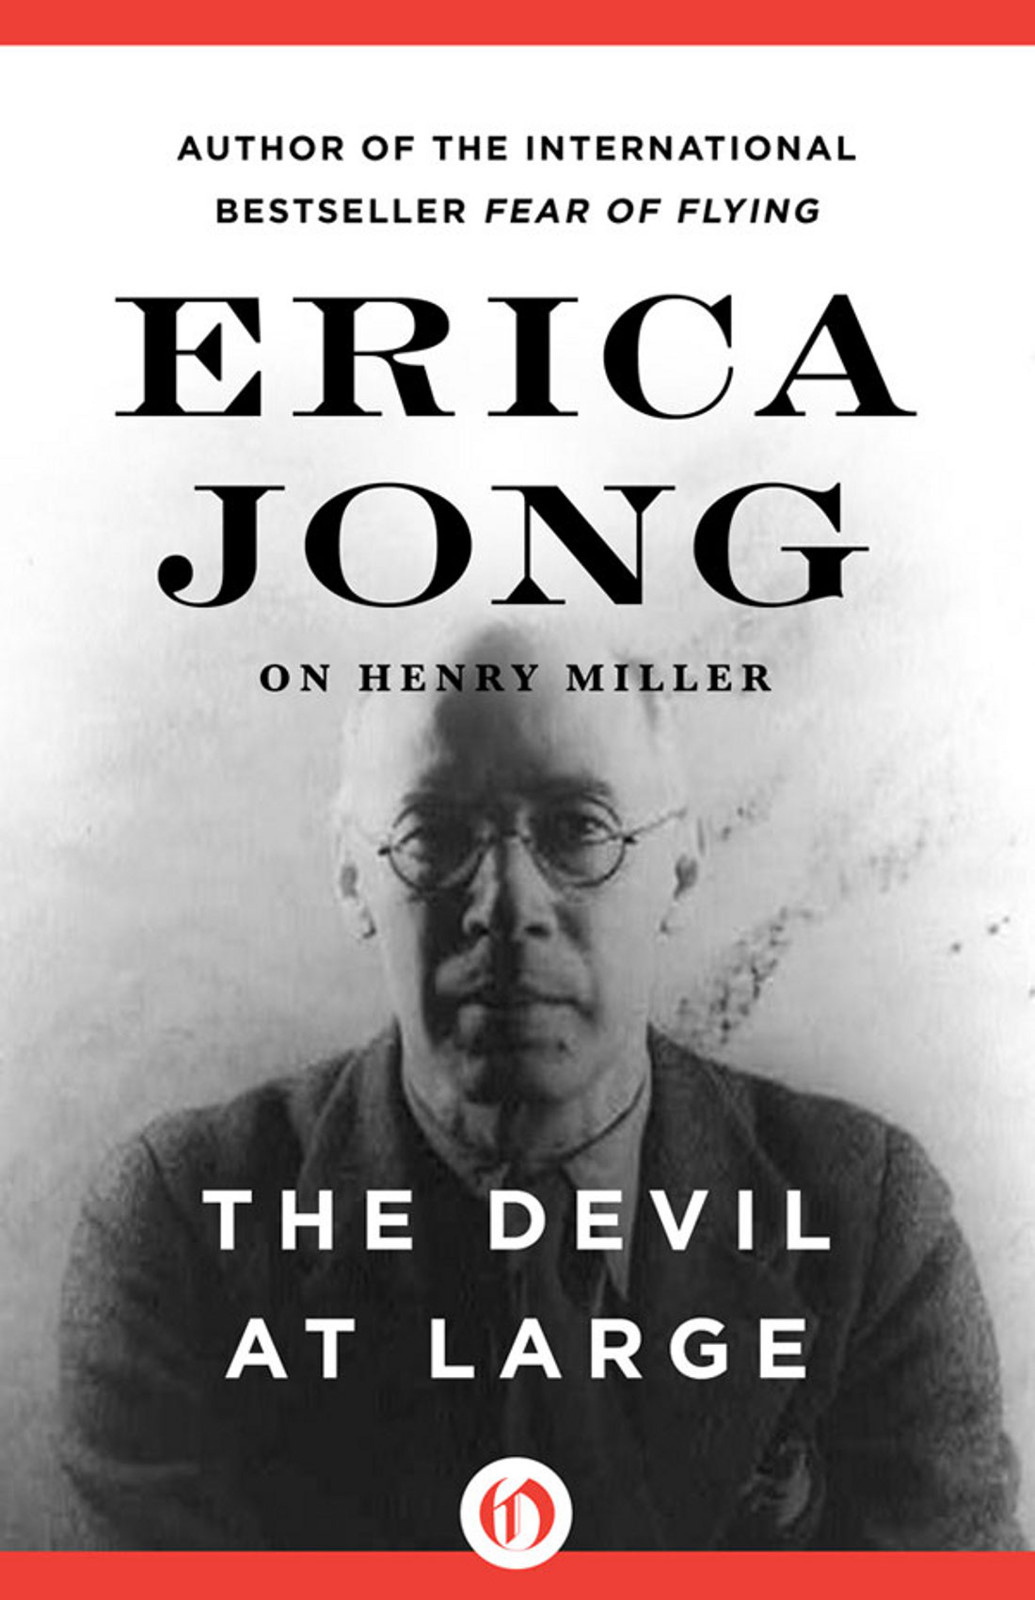 The Devil at Large by Erica Jong